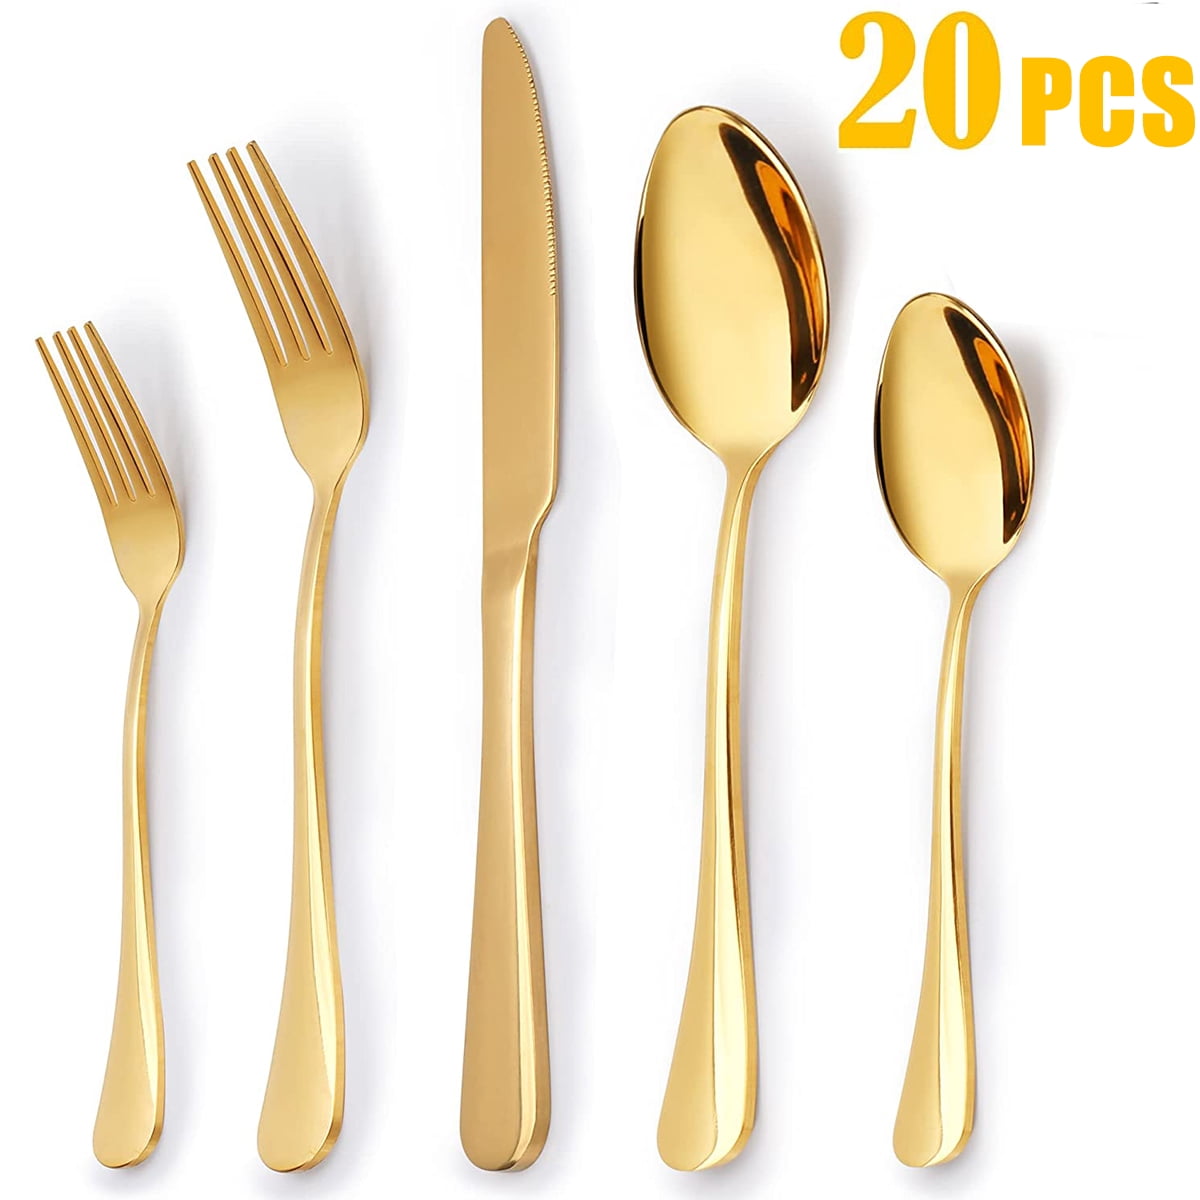 Stainless Steel Utensils Service for 4 Include Knife/Fork/Spoon Dishwasher Safe Golden Mirror Polished 20-Piece Silverware Flatware Cutlery Set 